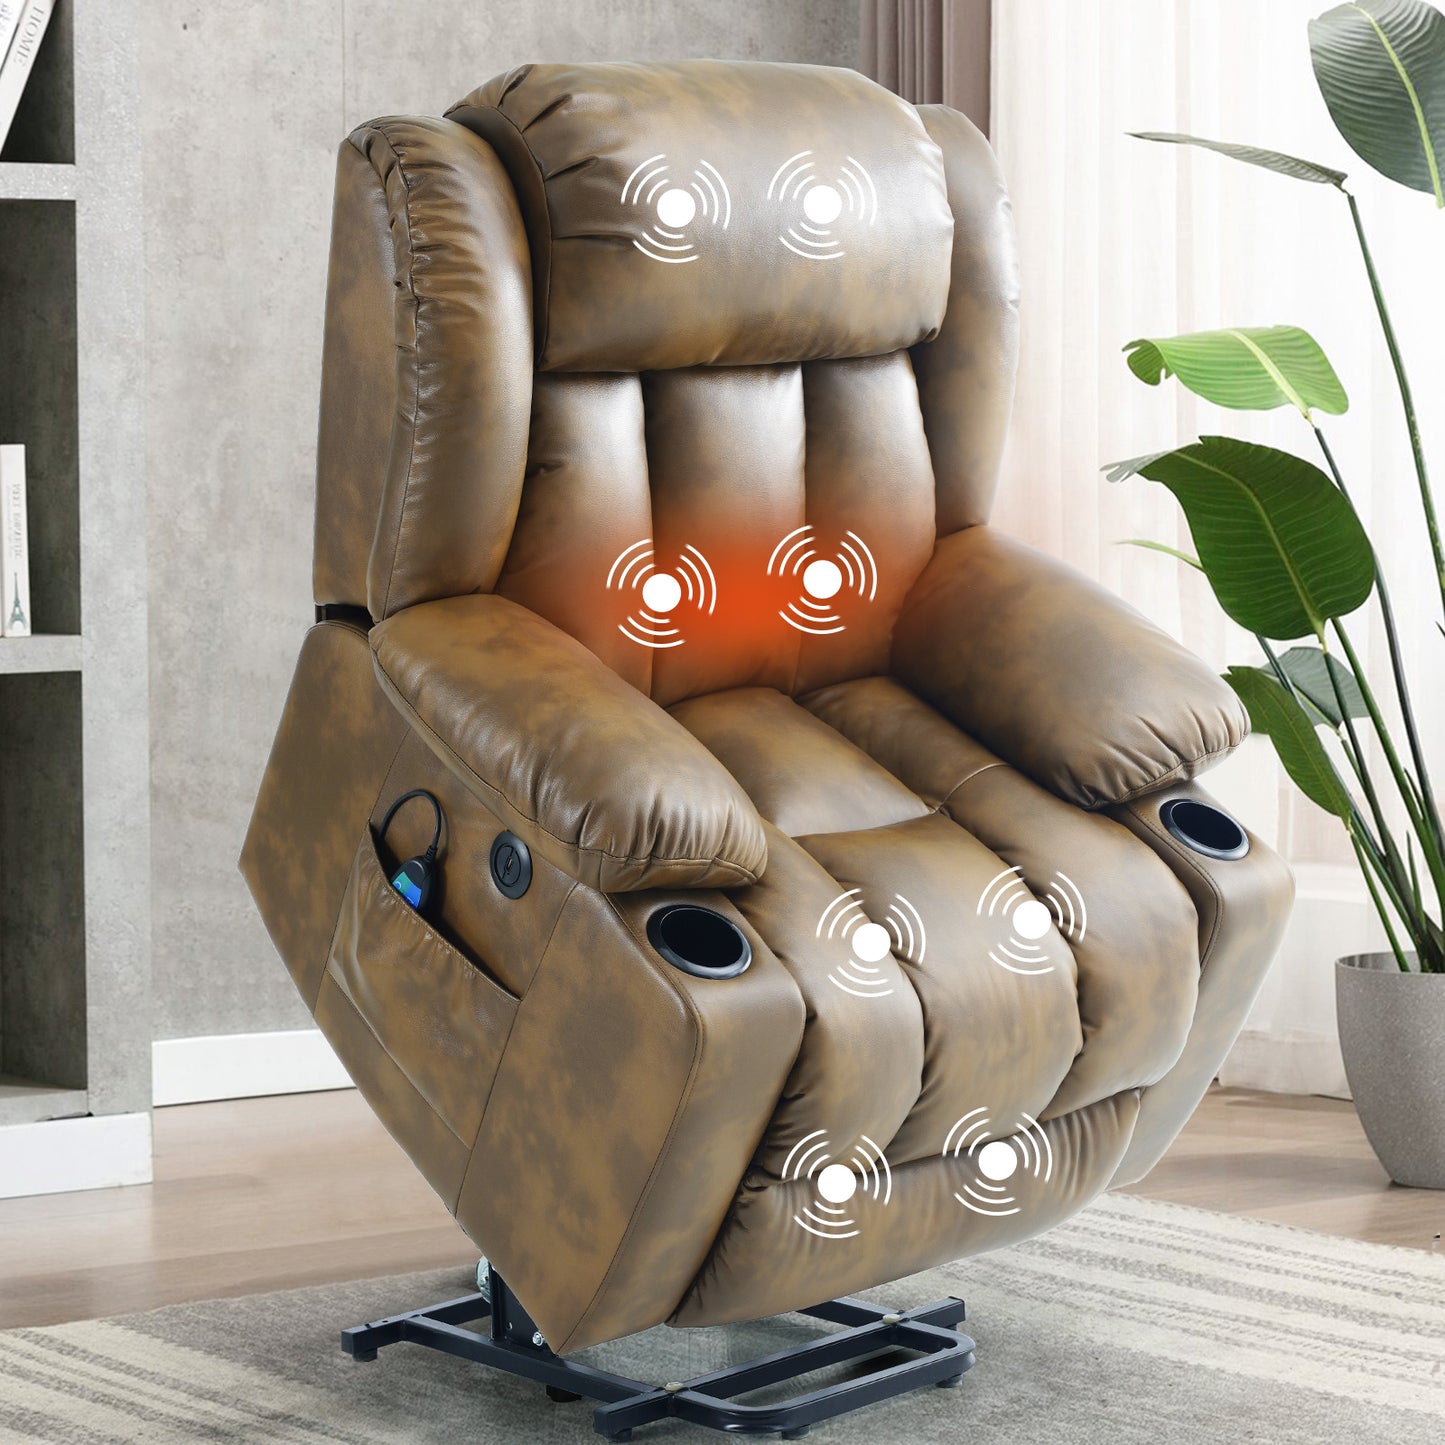 Large Power Lift Recliner Chair for Elderly with Massage and Heating Function